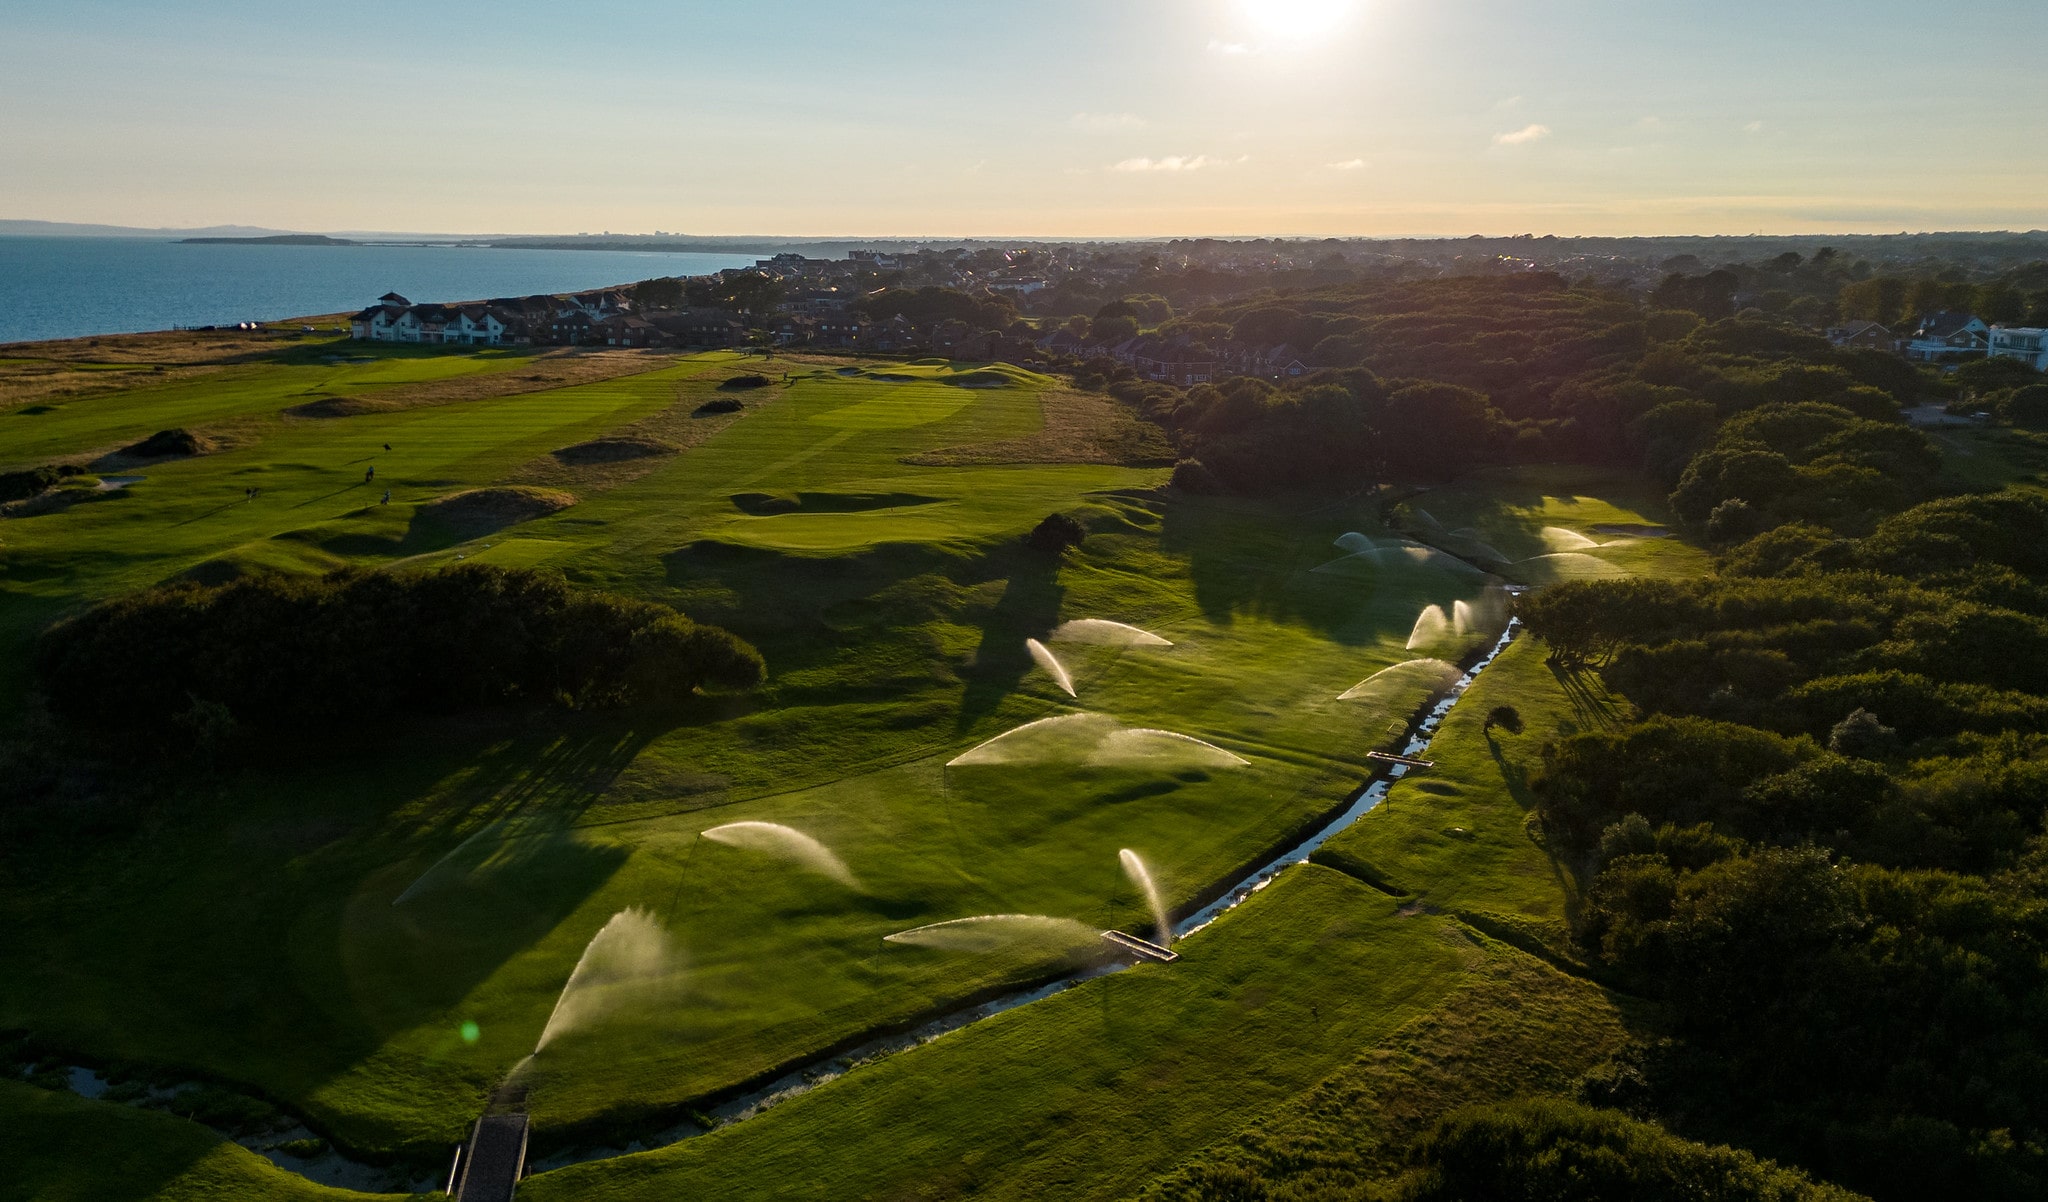 An aerial shot of Barton-on-Sea Golf Club's irrigation system at work.